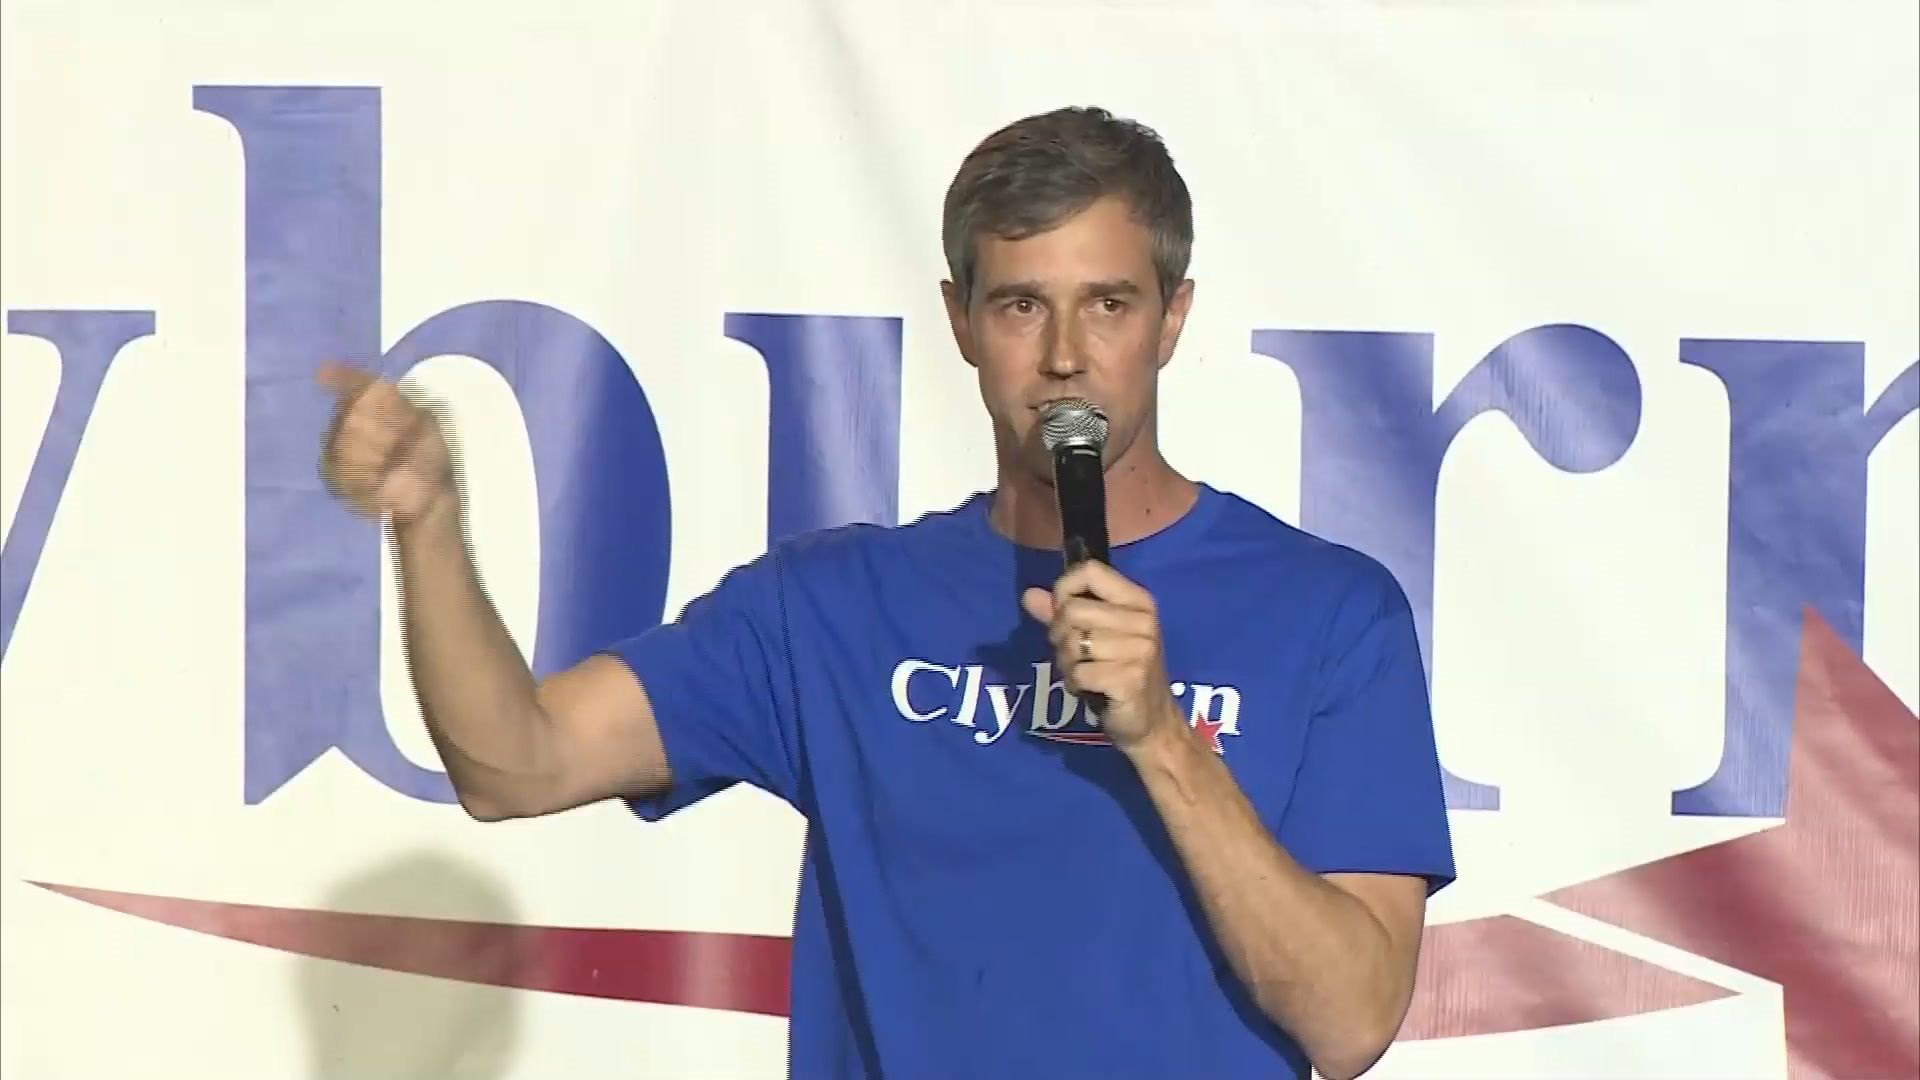 Former Texas Congressman Beto O'Rourke spoke at Rep. James Clyburn's World Famous Fish Fry in Columbia, South Carolina on June 22, 2019. O'Rourke is running for the Democratic nomination for president.